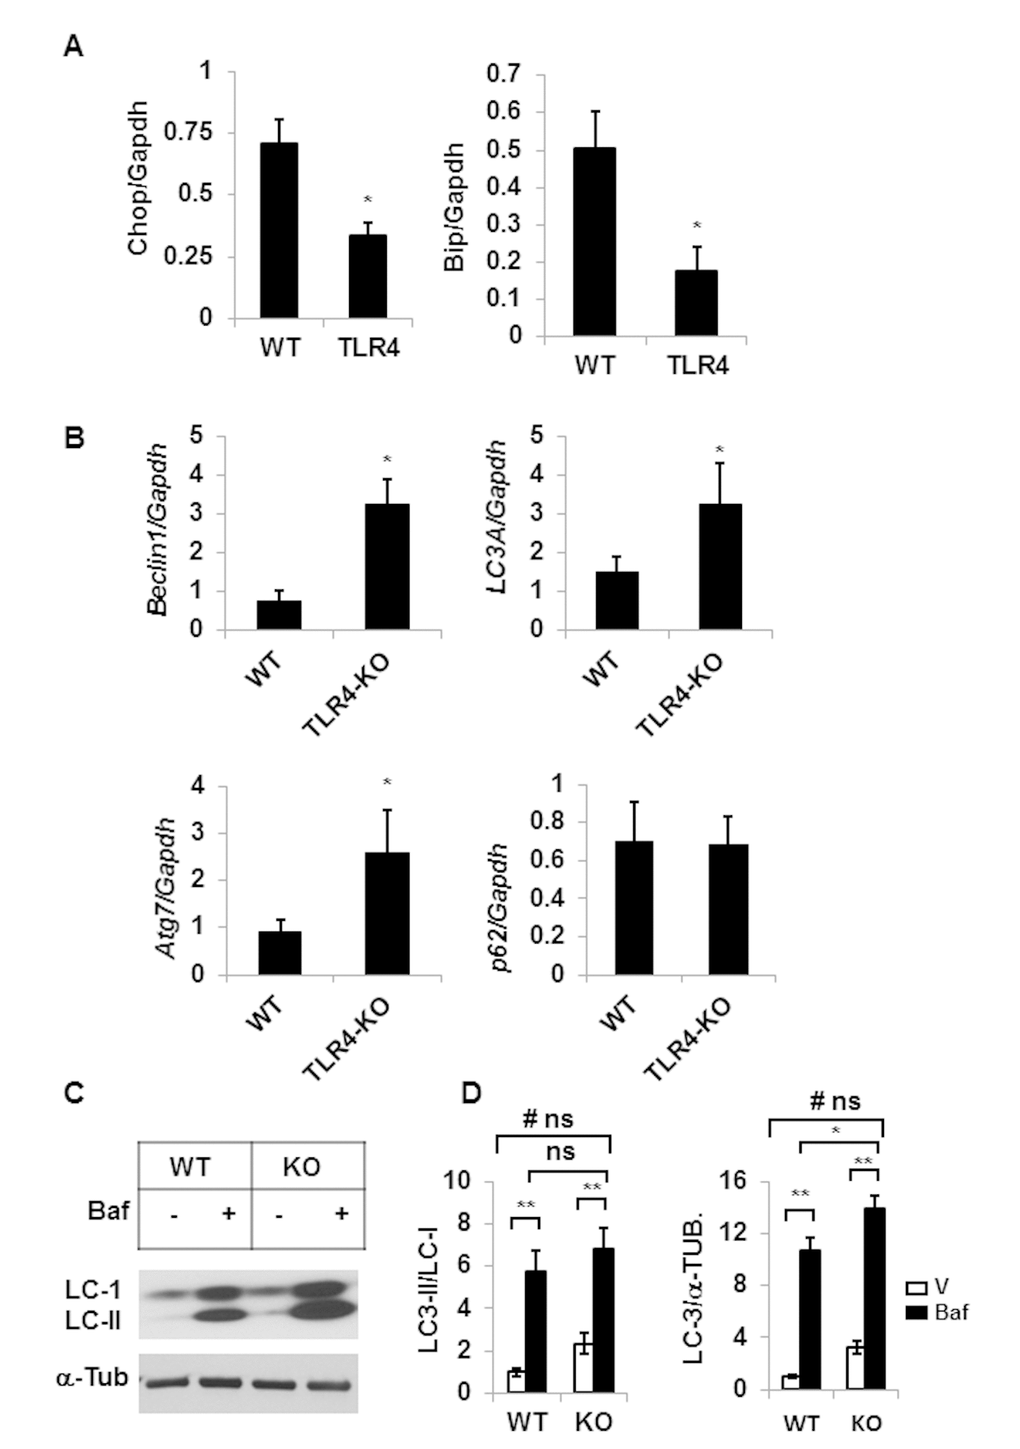 TLR4-KO old mice are protected from adipose tissue inflammation and ER stress. Relative mRNA expressions of ER stress response genes (A) and autophagy genes (B) in adipose tissue of old (20 m) WT and TLR4 deficient mice were analyzed by qRT-PCR. Data represented in bar diagrams are mean + SD value of relative mRNA expression from three independent experiments where total RNA was extracted from the adipose tissue of WT (n=5) and TLR4 deficient (n=5) mice and used as a template for one-step qRT-PCR reaction. (C) Western blot analysis of II/I from SVFs lysates isolated from WT (n=5) and TLR4-KO (n=5) and pooled and treated with either vehicle (DMSO) or Baf (10 nM) for 18h in culture. The density of protein bands from three independent experiments were normalized with α-tubulin and plotted (D). Values were presented as mean + SD of three independent experiments. Significance of difference between means was determined by Student’s t-test and indicated by *pp# indicated the significance level (p